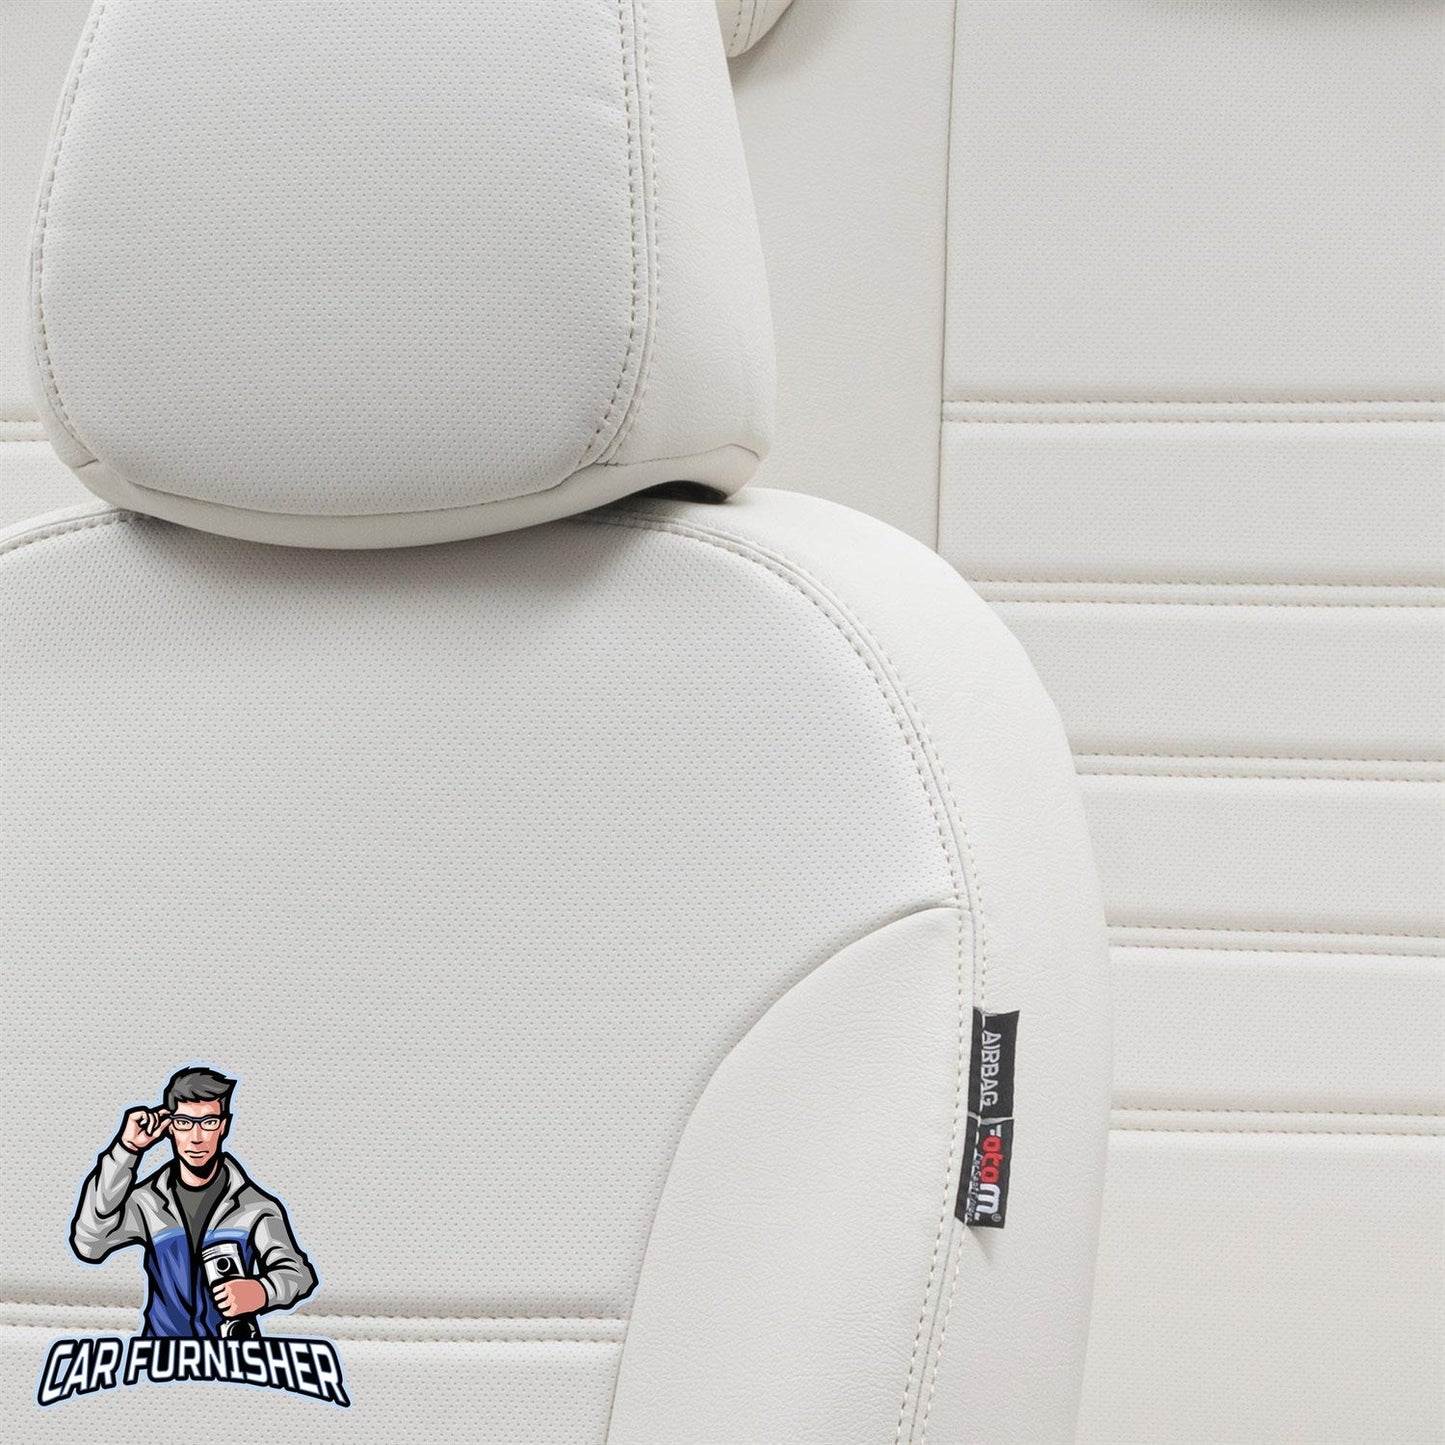 Nissan Note Seat Covers Istanbul Leather Design Ivory Leather